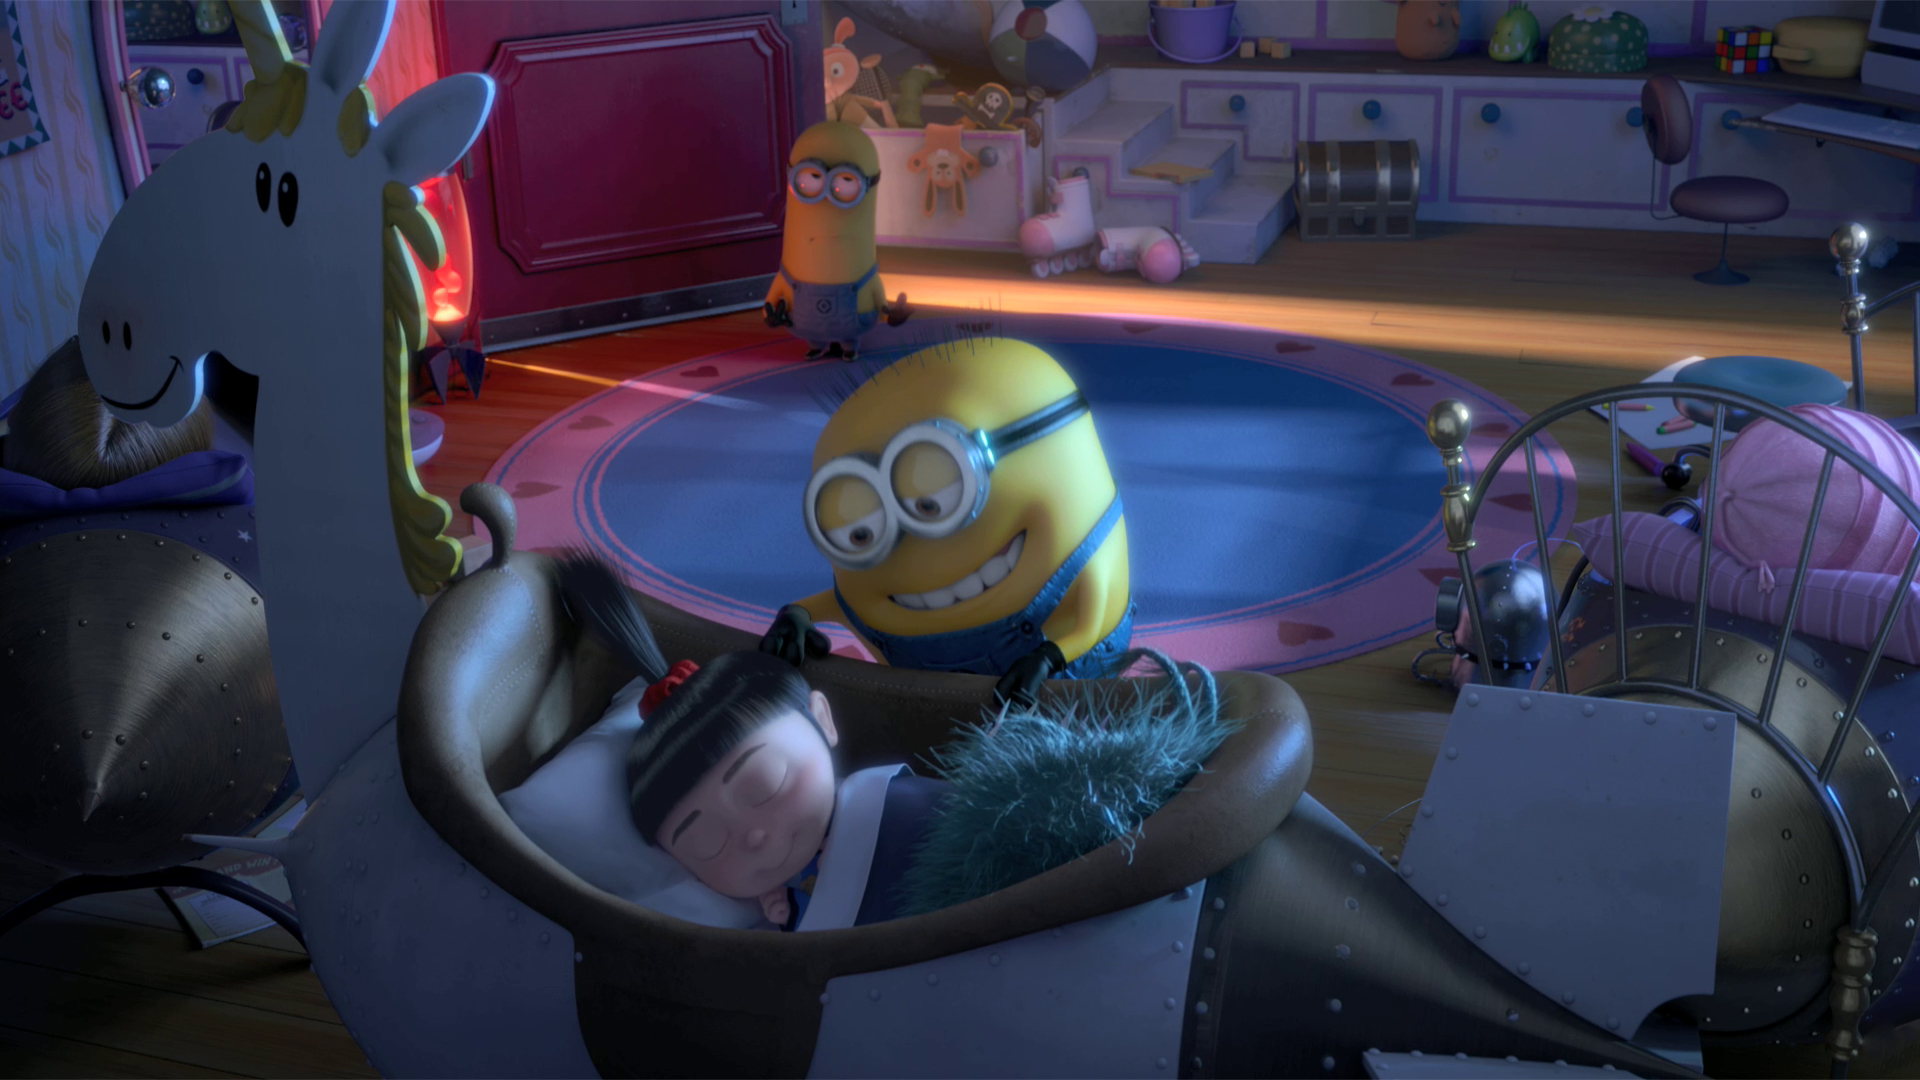 Best Despicable Me 2 Minions Wallpaper Collection